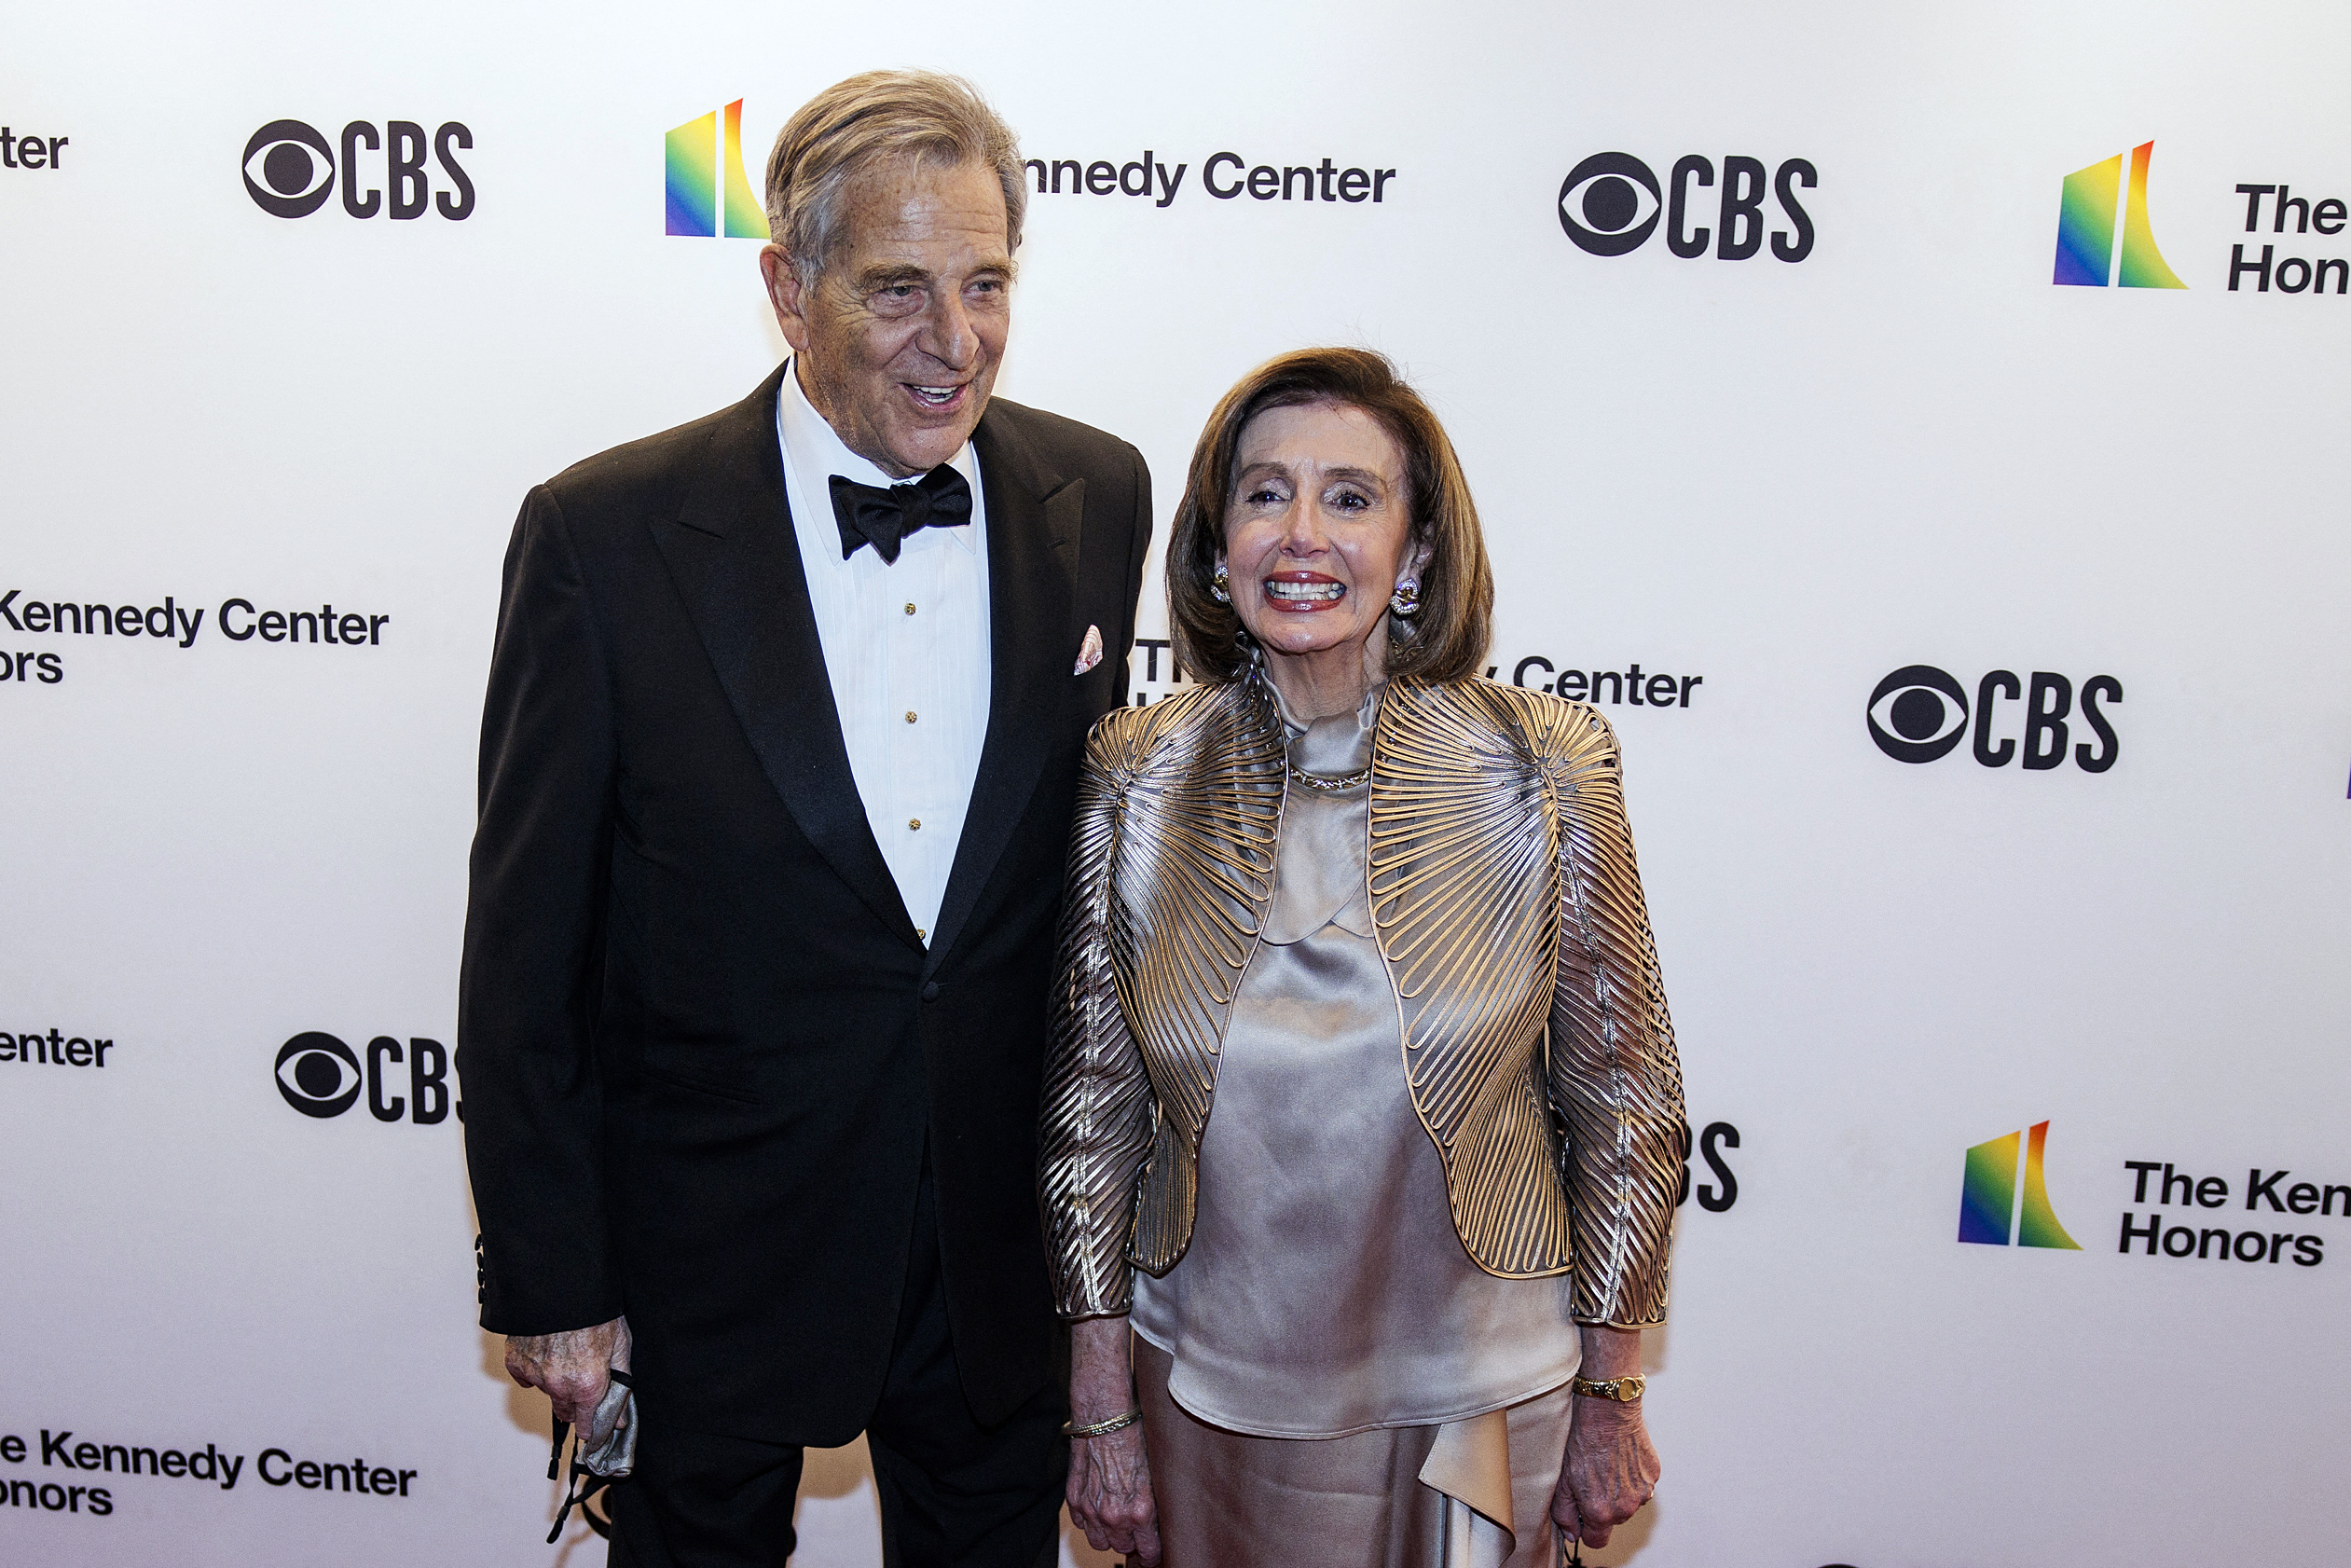 Speaker of the House Nancy Pelosi and husband Paul Pelosi attend the 44th Kennedy Center Honors at the Kennedy Center in Washington, D.C., on Dec. 5. (Samuel Corum/AFP via Getty Images)